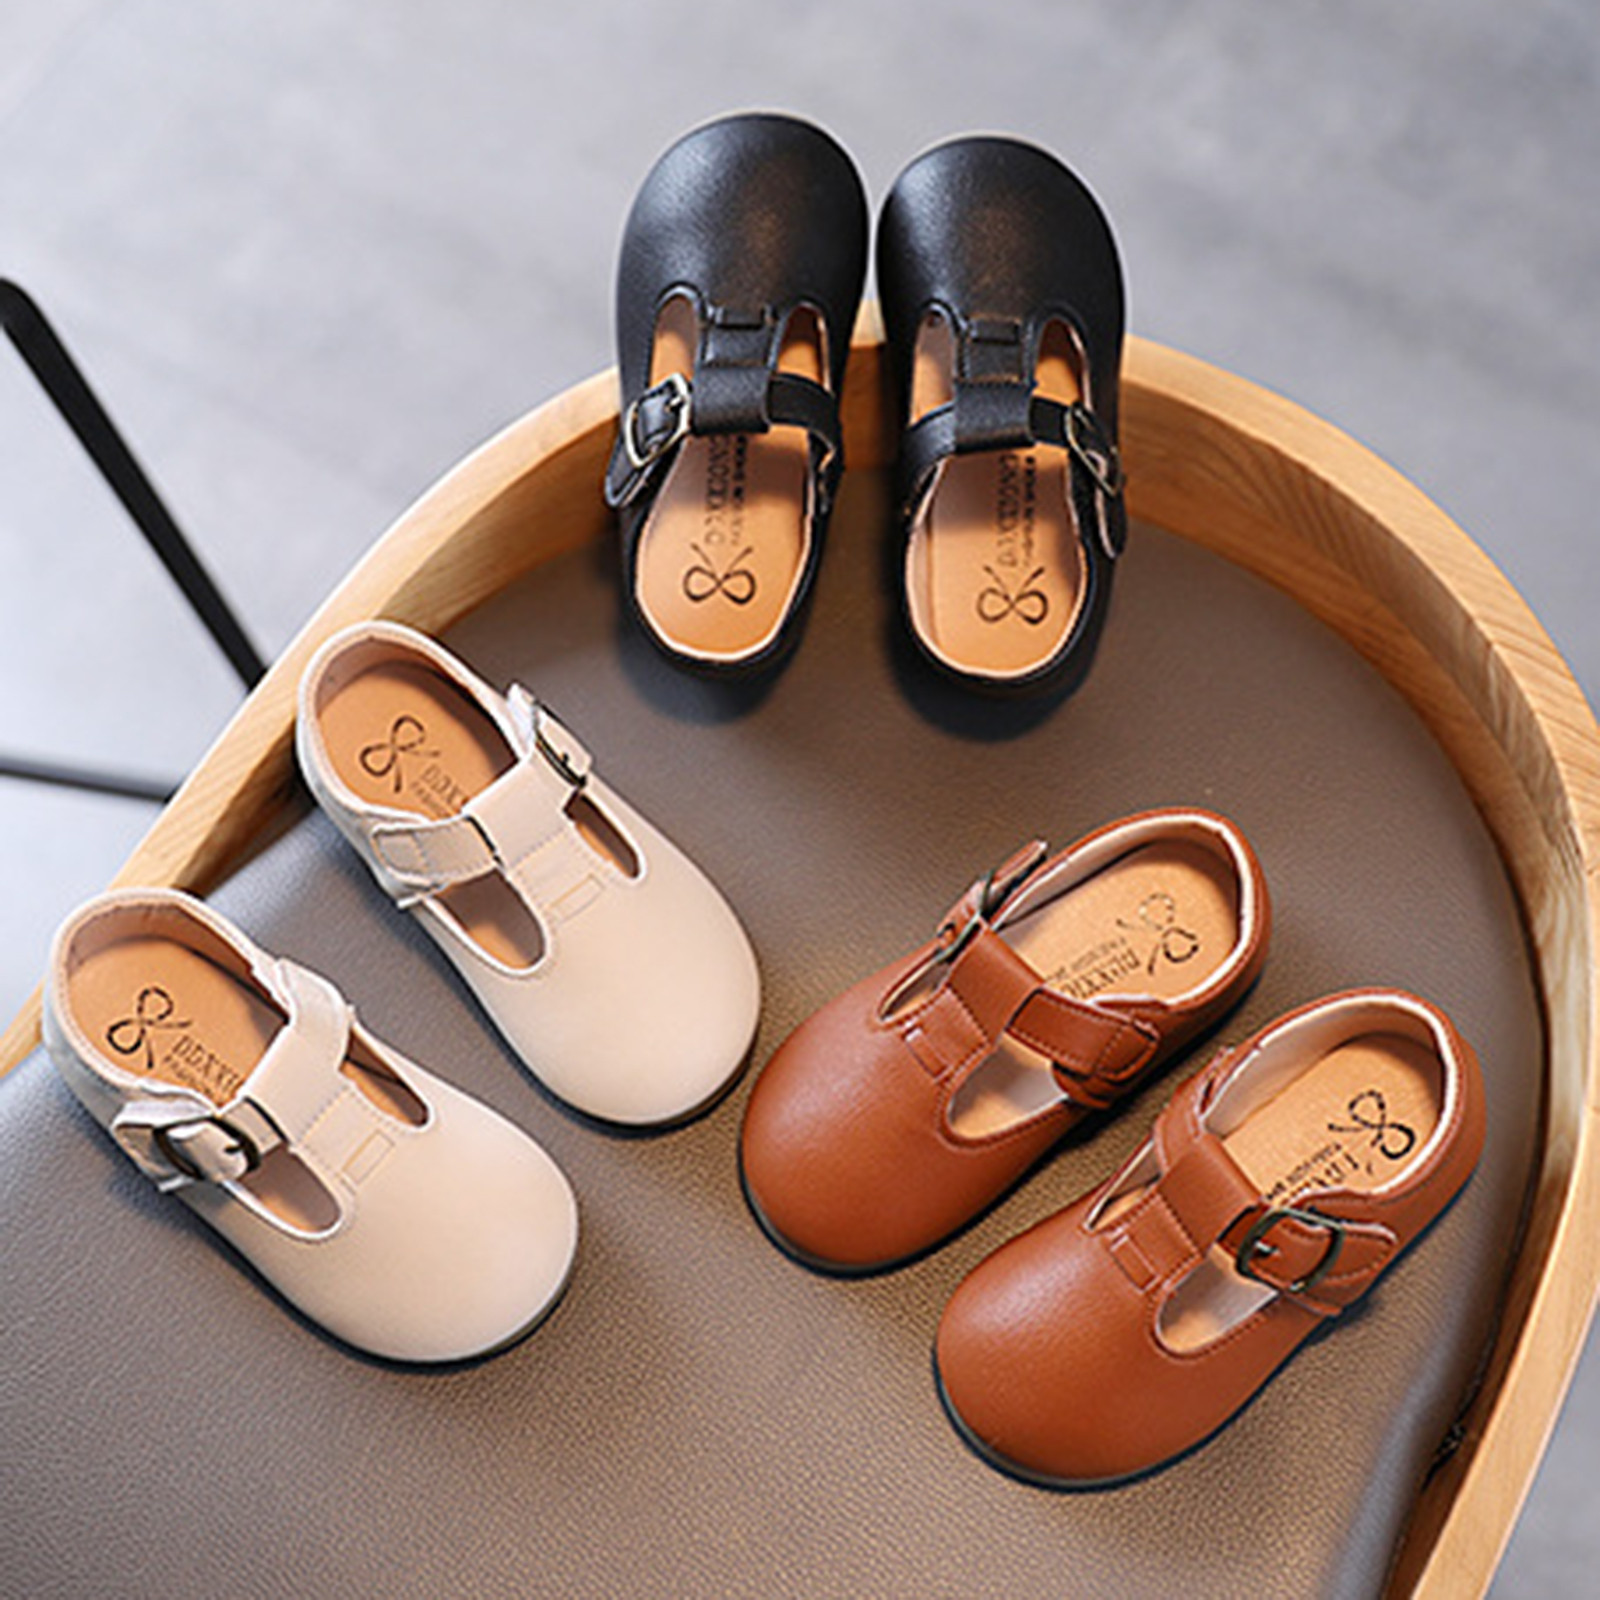 Children-Leather-Shoes-Girls-Boys-Non-slip-T-Buckle-Strap-Flats-Baby-Shoes-Infant-First-Walkers-5